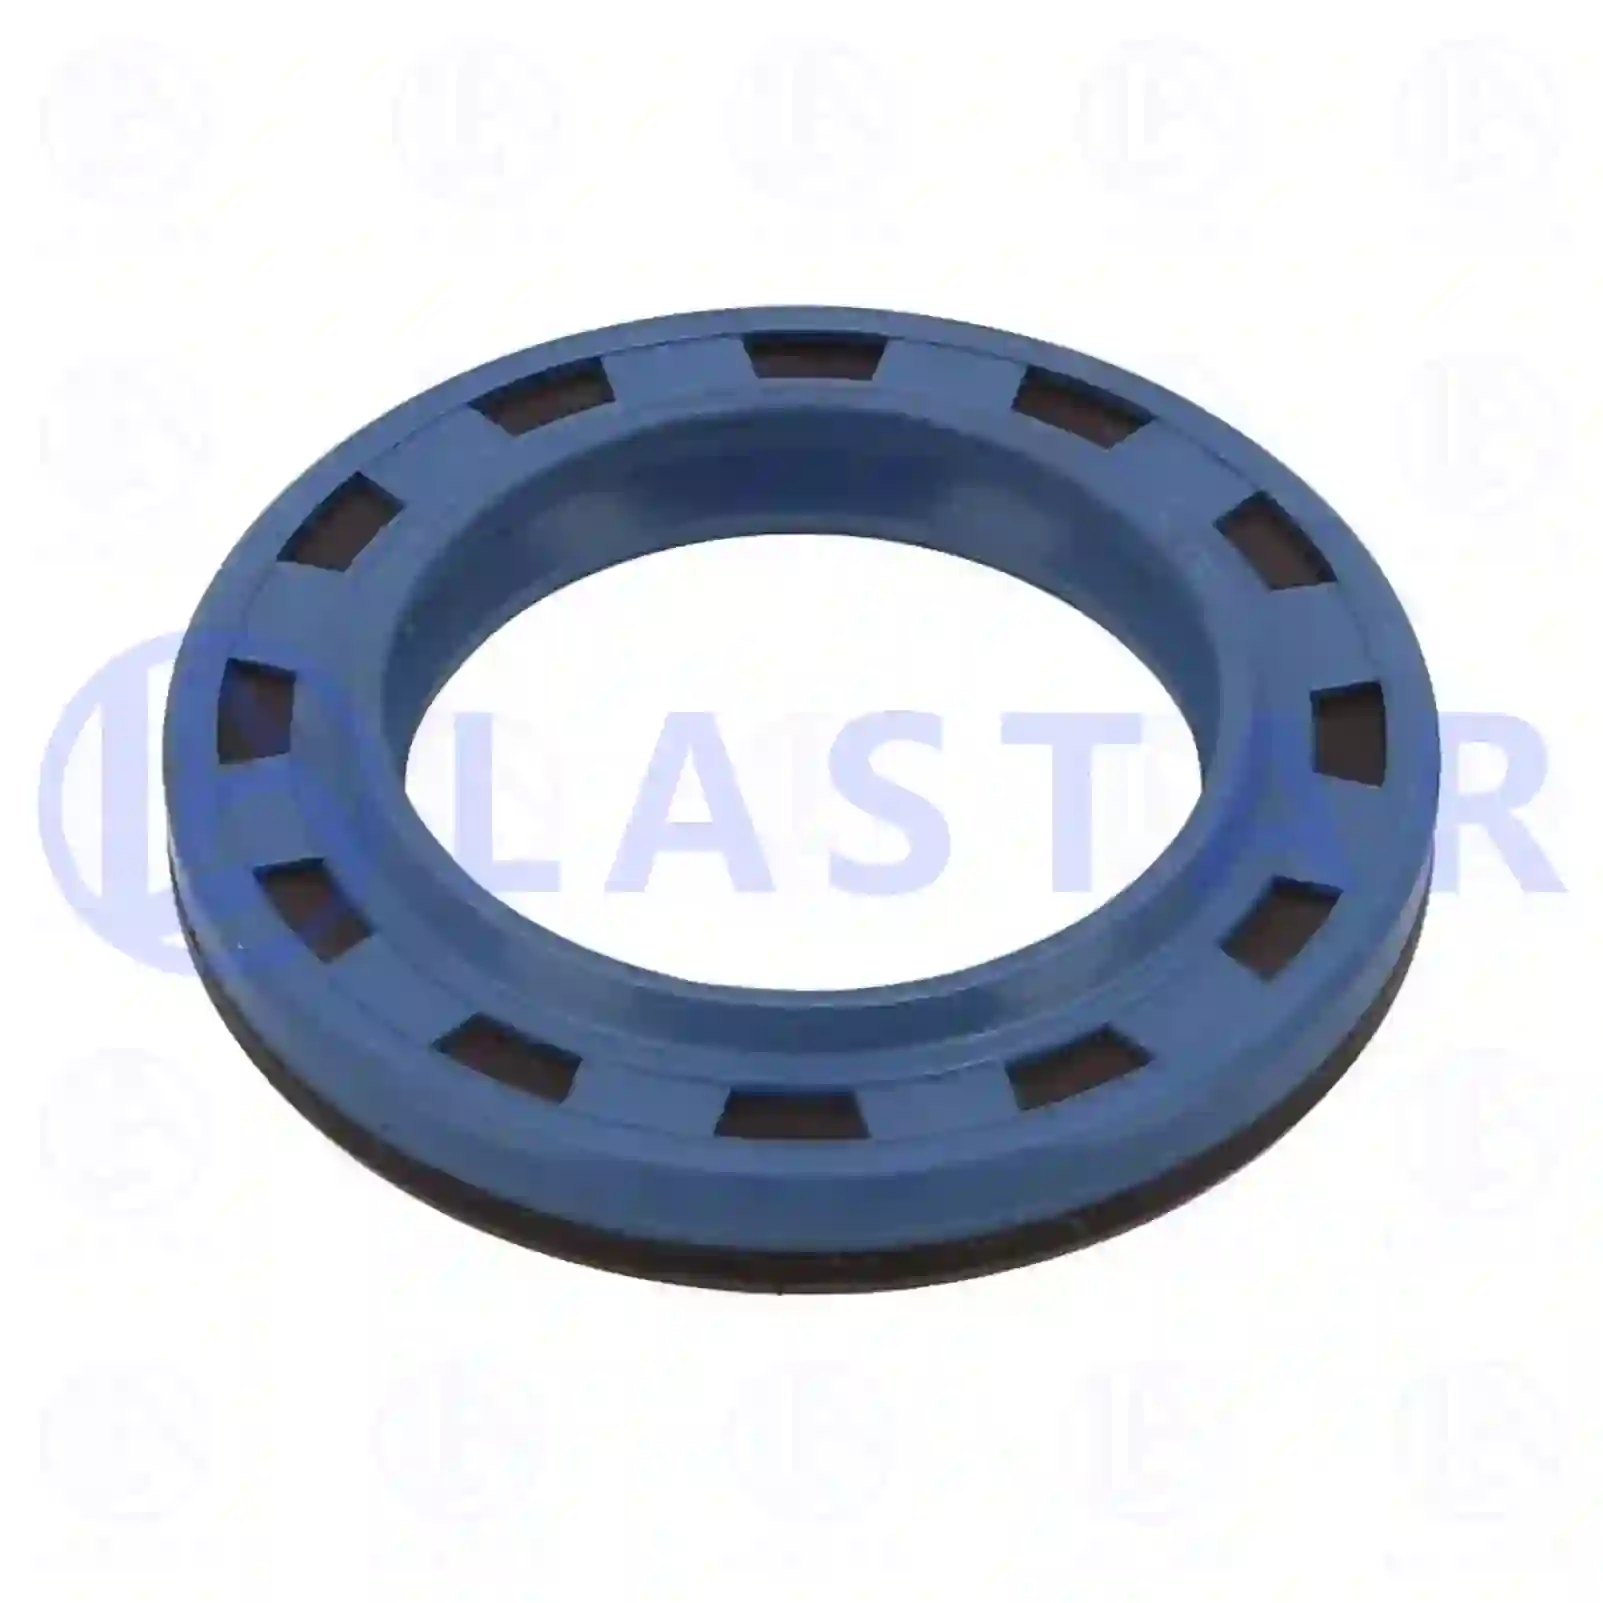 Oil seal, 77732136, 7403152527, 3152527, ||  77732136 Lastar Spare Part | Truck Spare Parts, Auotomotive Spare Parts Oil seal, 77732136, 7403152527, 3152527, ||  77732136 Lastar Spare Part | Truck Spare Parts, Auotomotive Spare Parts